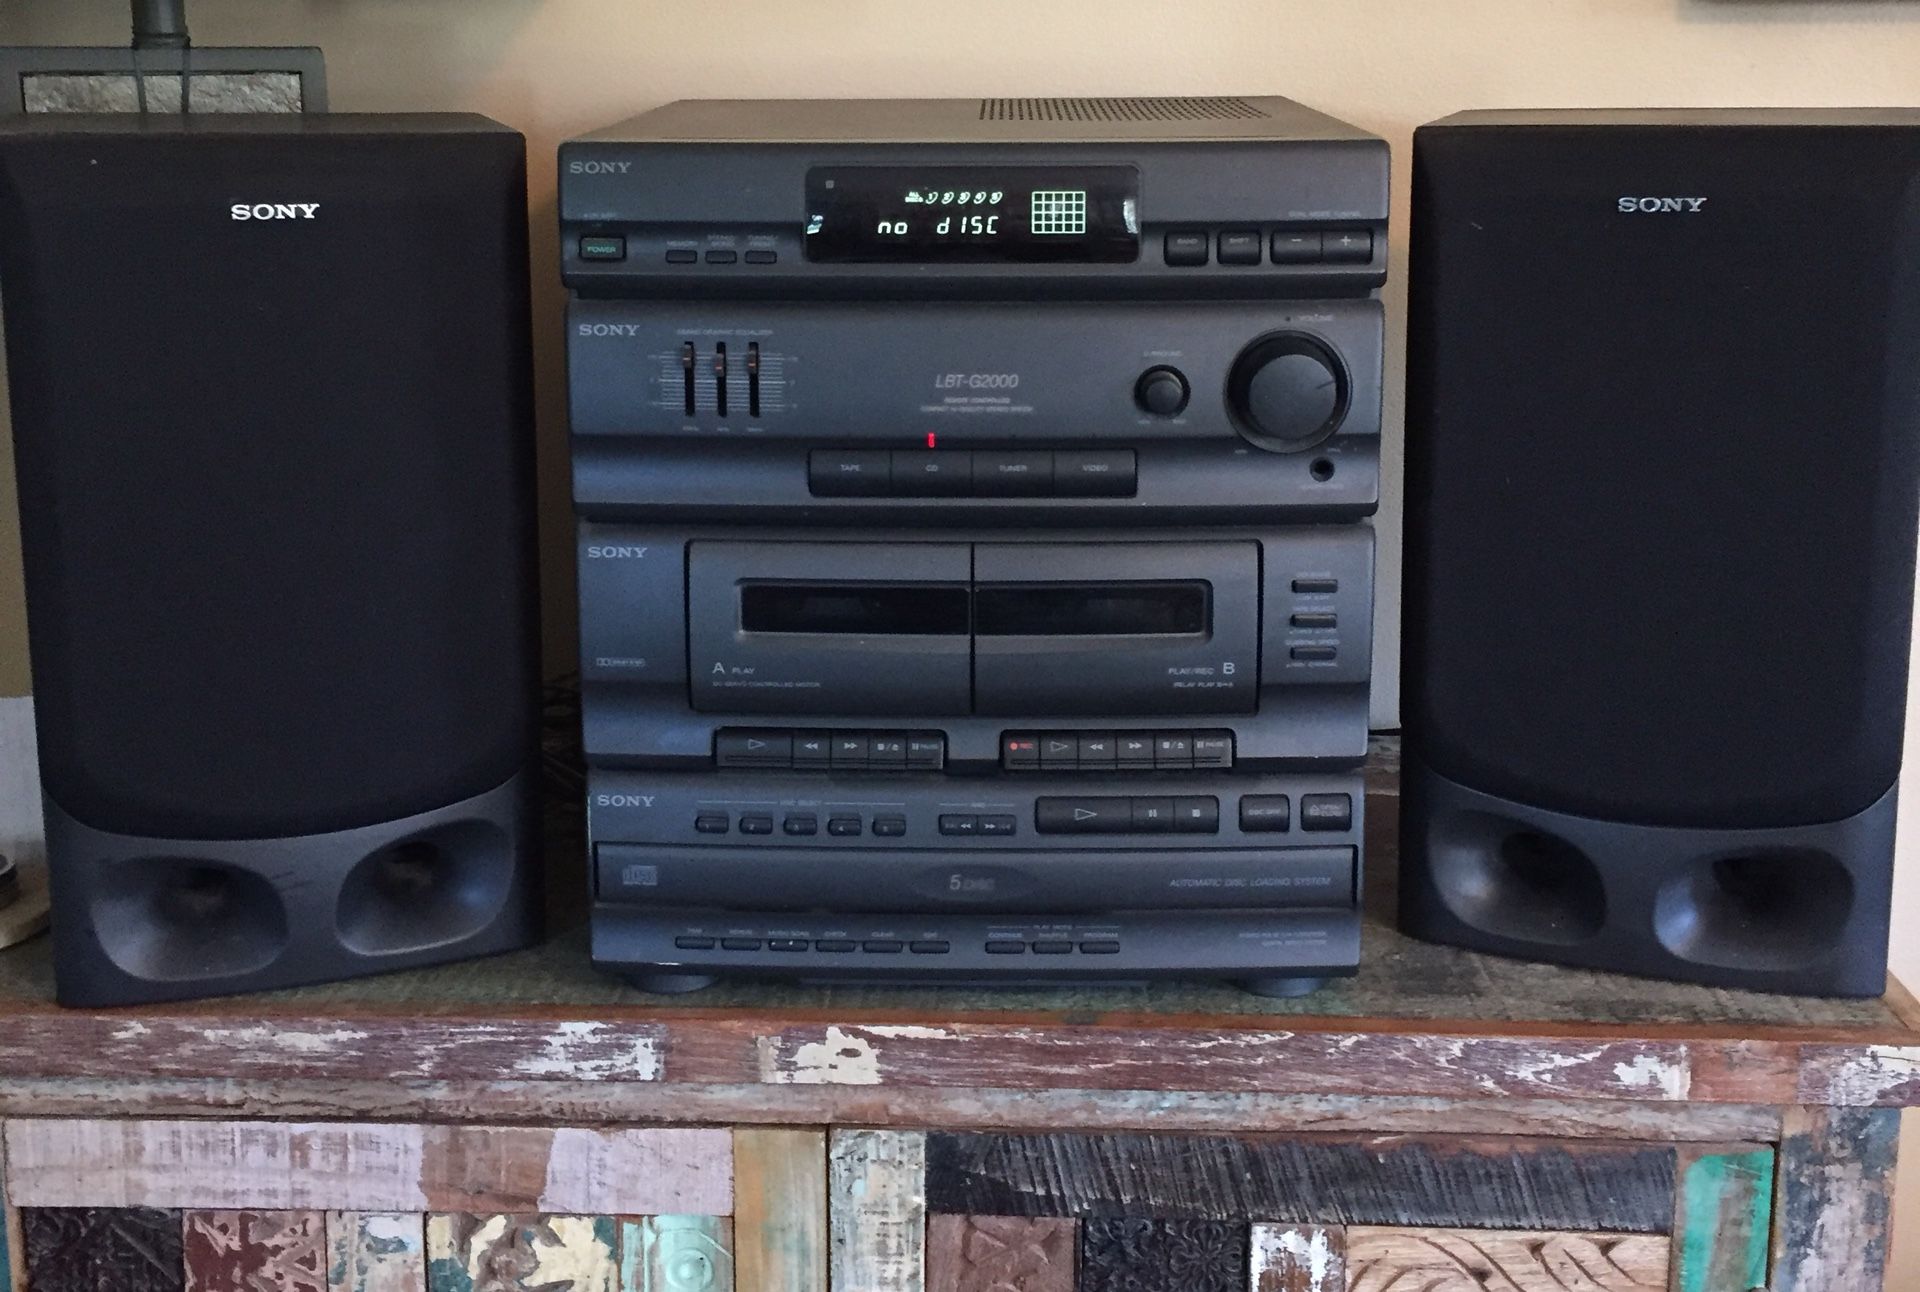 Sony LBT-G2000 Compact Hi-Fi stereo system plus Sony speakers and 1/2 spool of speaker wire. (5disc player, dual cassette,receiver). Porch pick-up